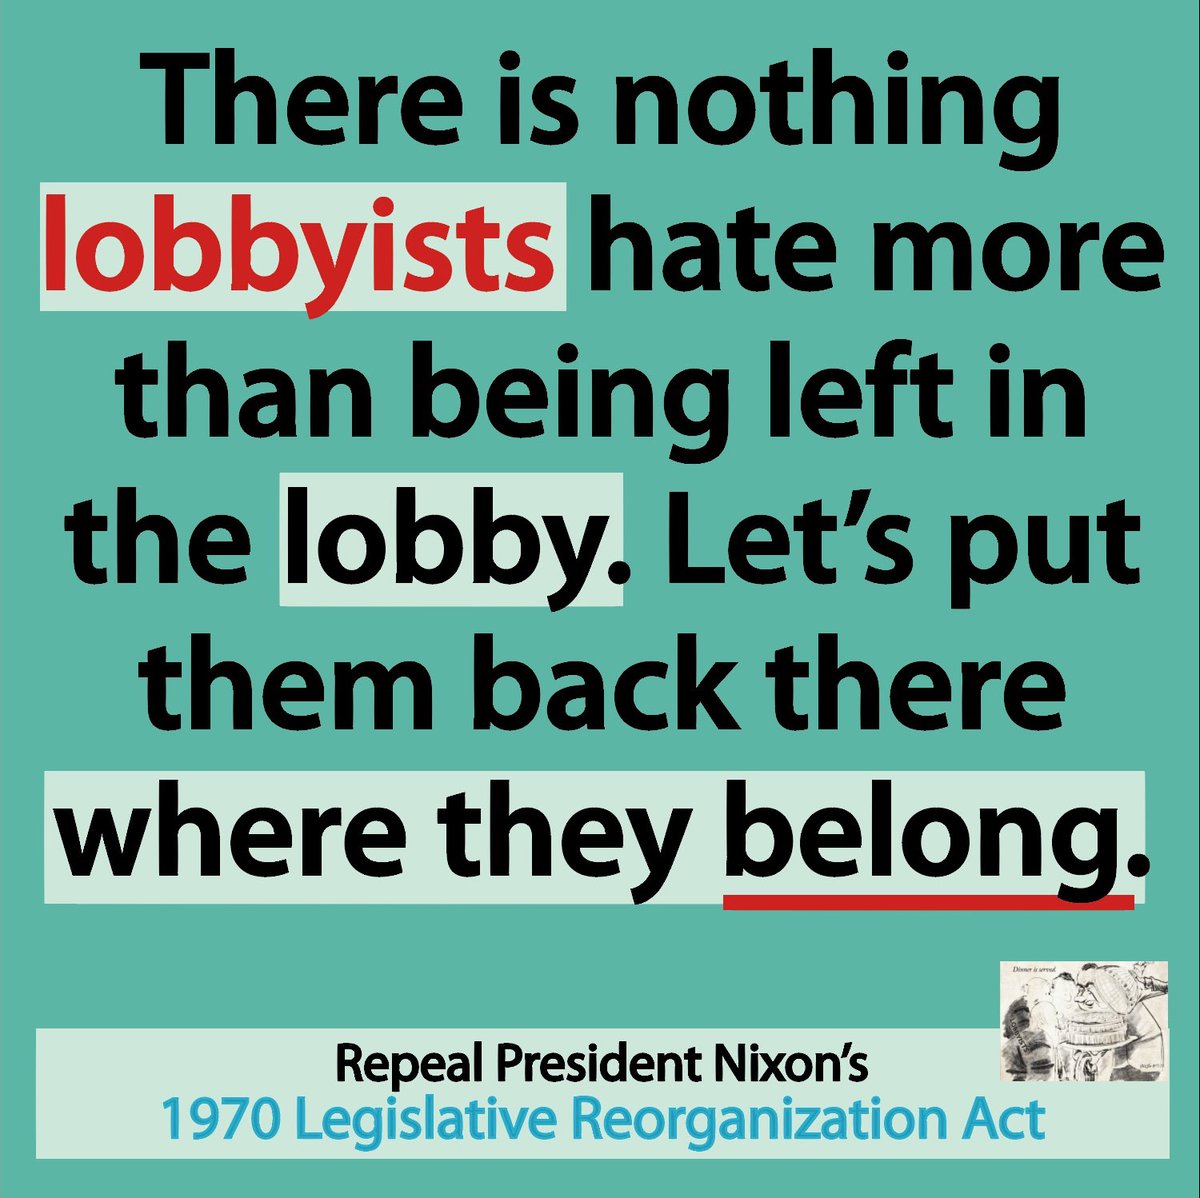 There is nothing lobbyists hate more than being left in the lobby. Let's put them back there where they belong. Repeal President Nixon's 1970 Legislative Reorganization Act. congressionalresearch.org/Citations.html